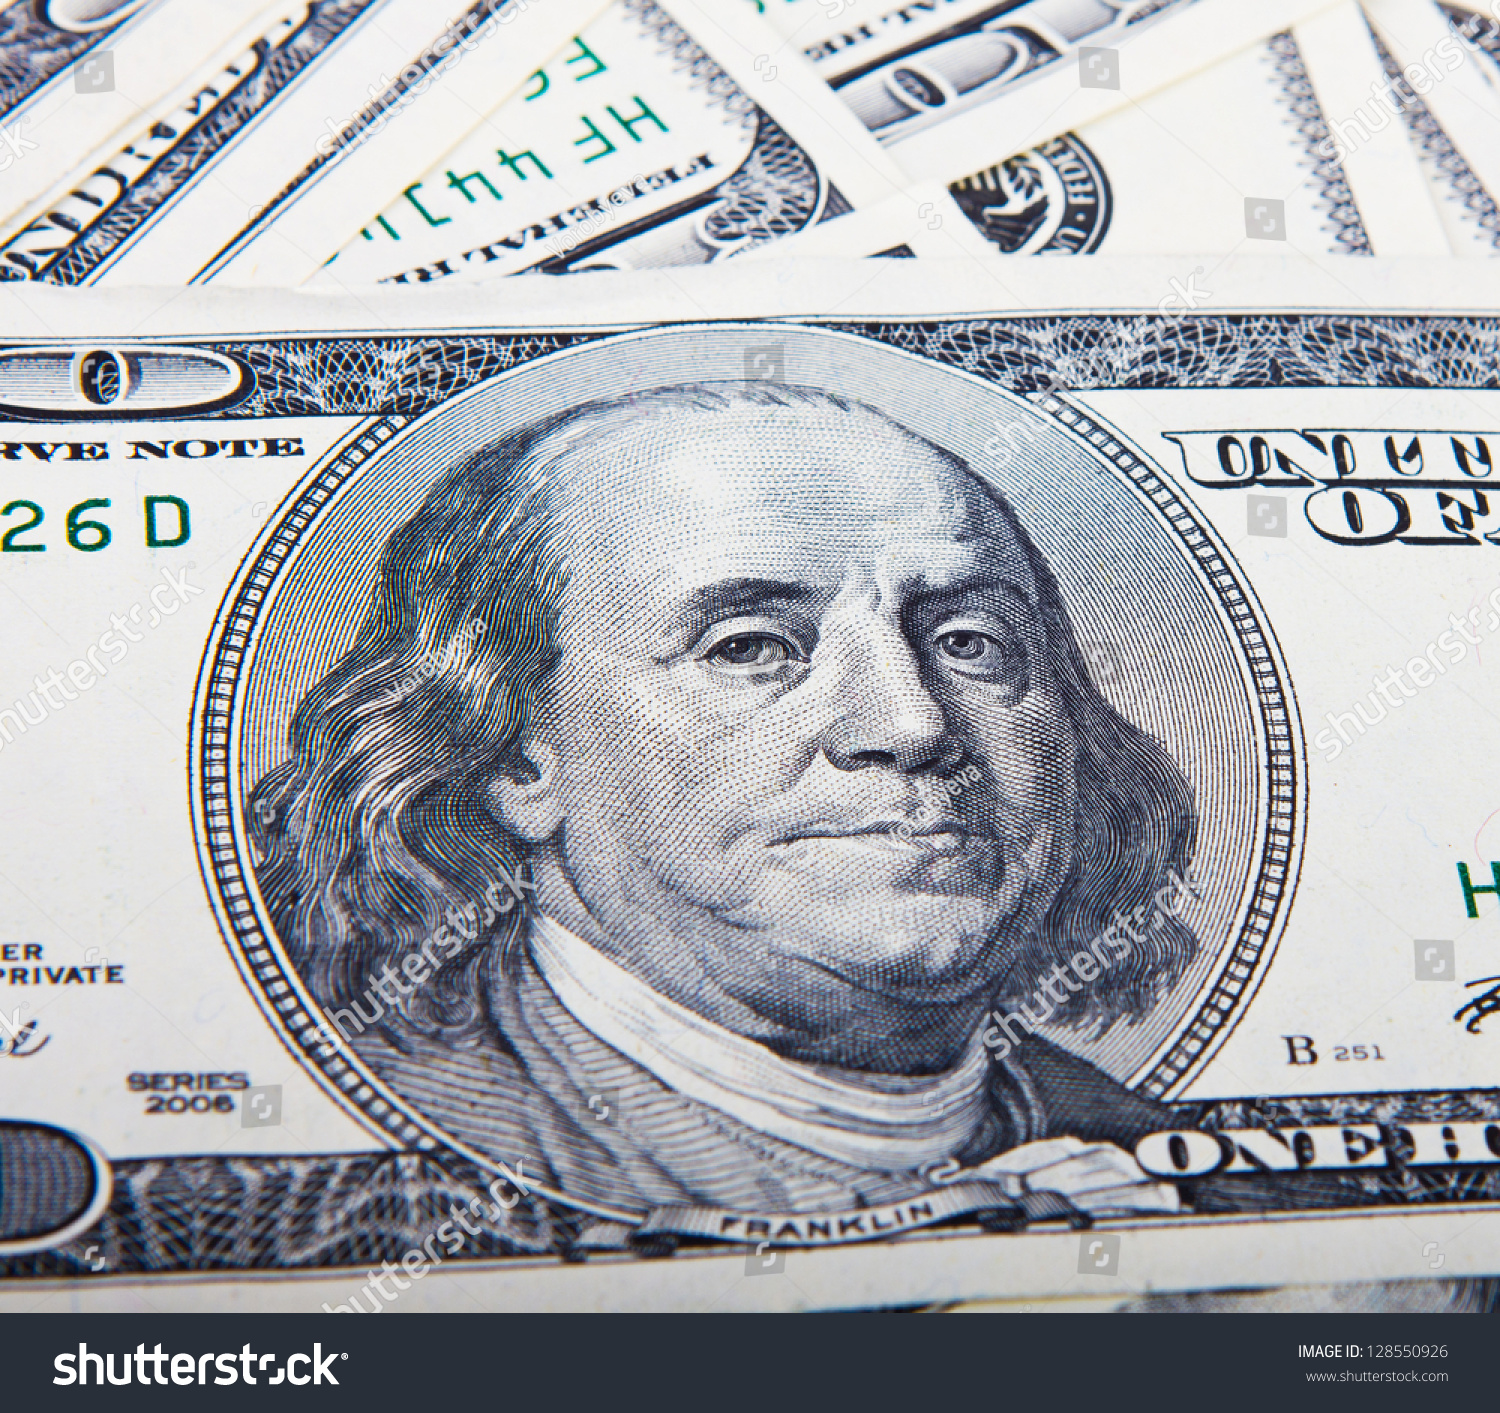 Dollars Closeup.Highly Detailed Picture Of American Money Stock Photo ...